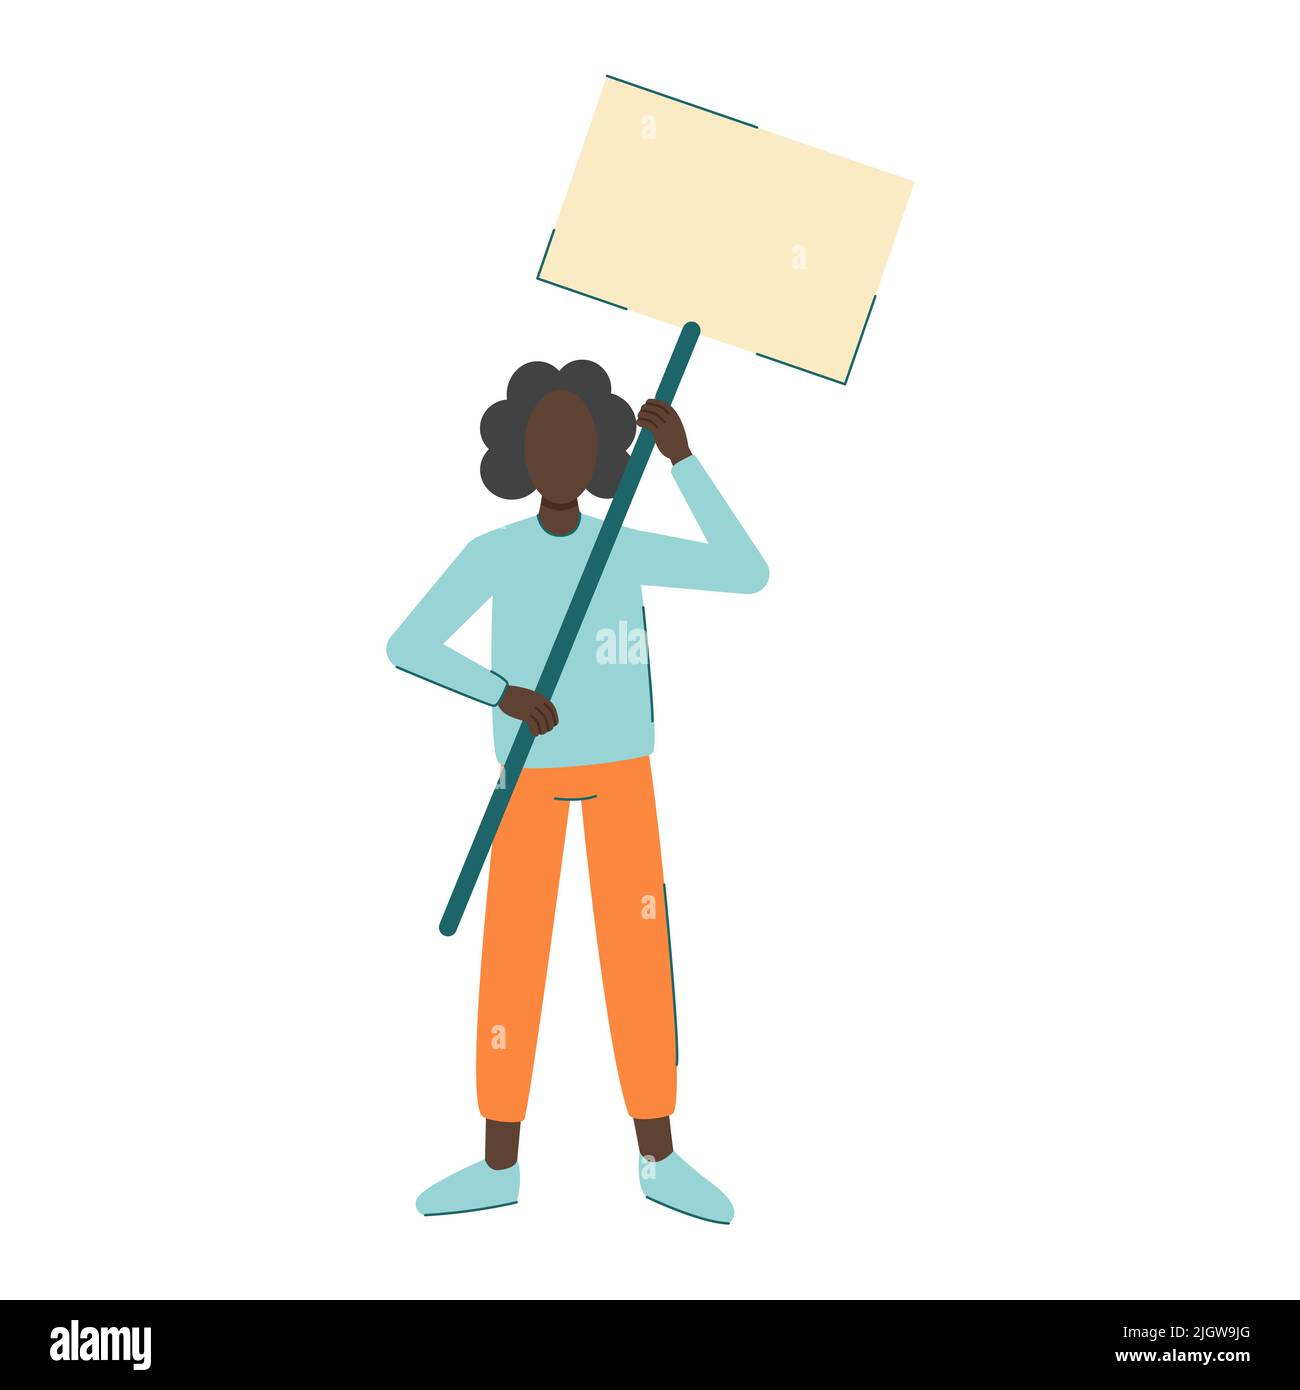 Black woman with banner protests Stock Vector